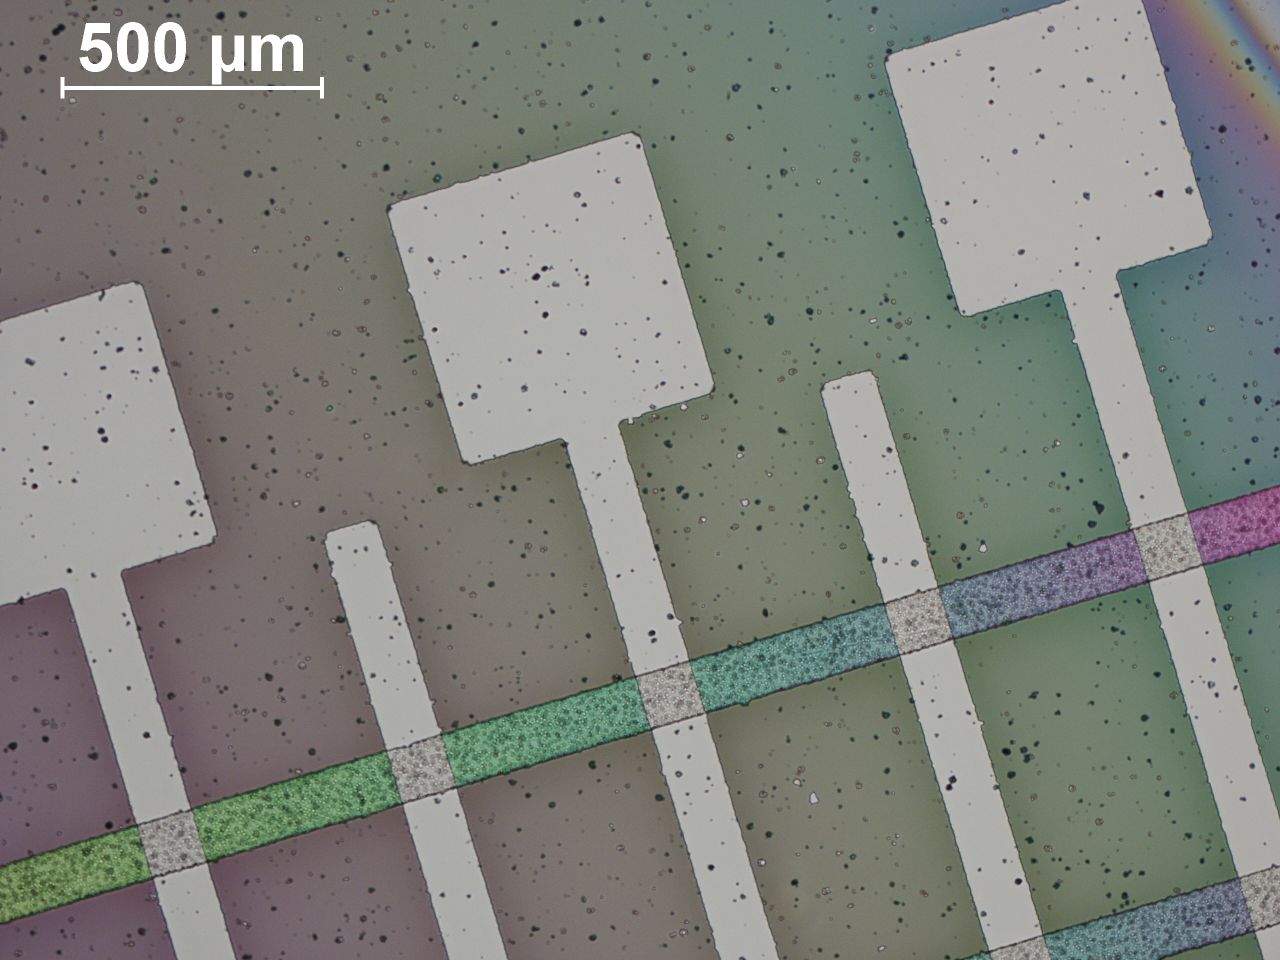 Unlike transistors, memristors don't require a silicon layer and therefore don't suffer from the limitations of current microchip manufacturing technology.